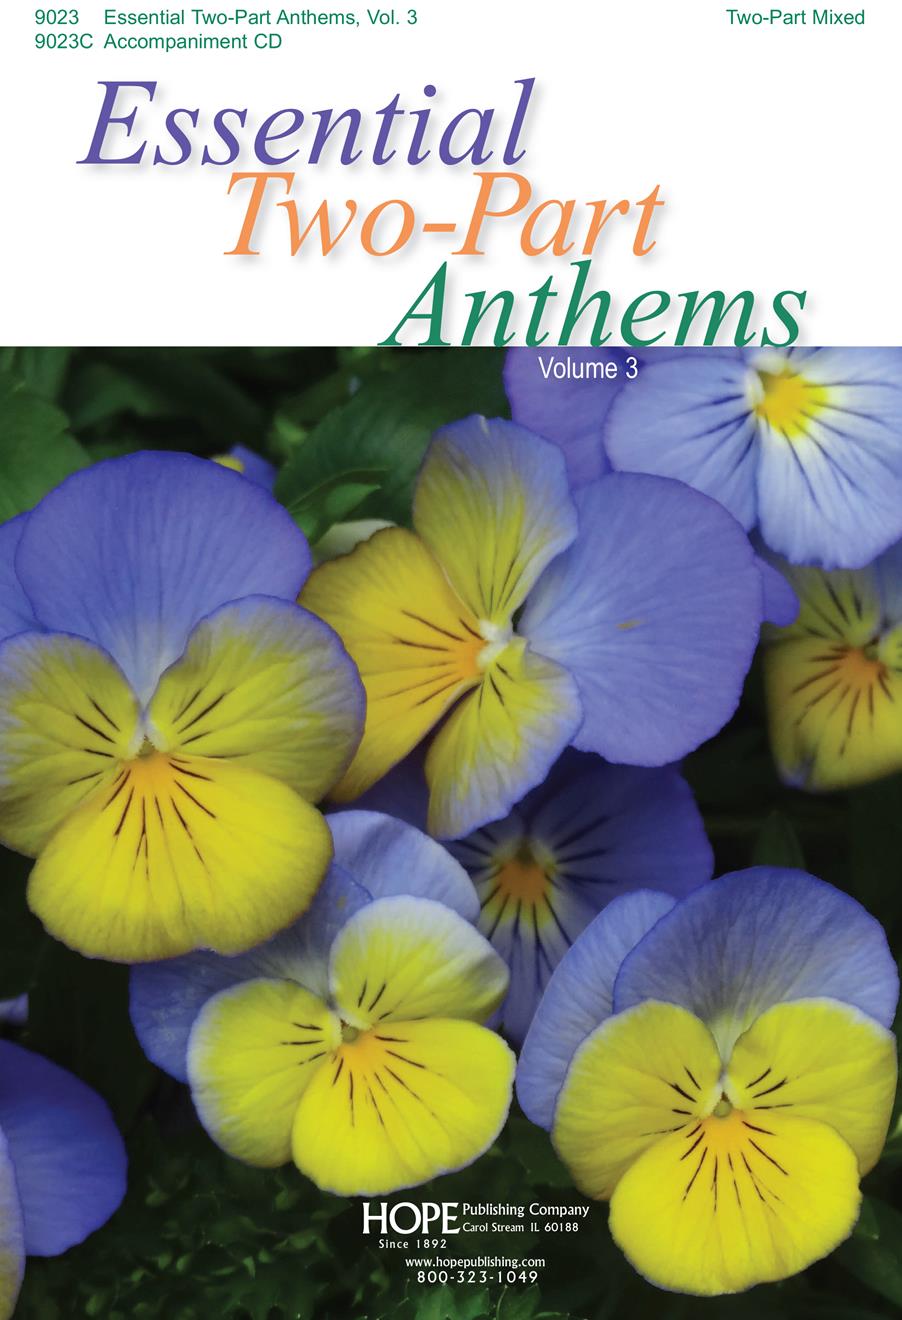 Essential Two-Part Anthems Vol. 3 - Score Cover Image